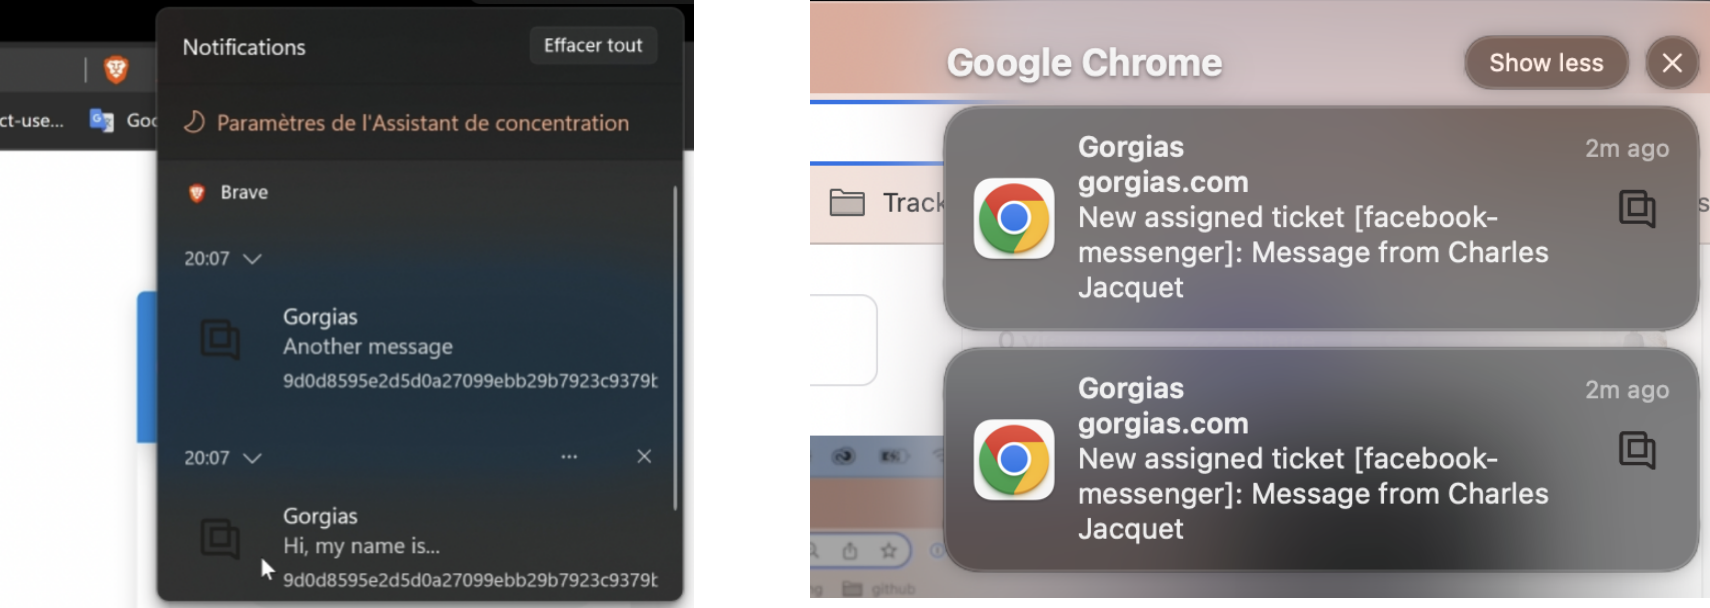 Web notifications are saved in your notification center